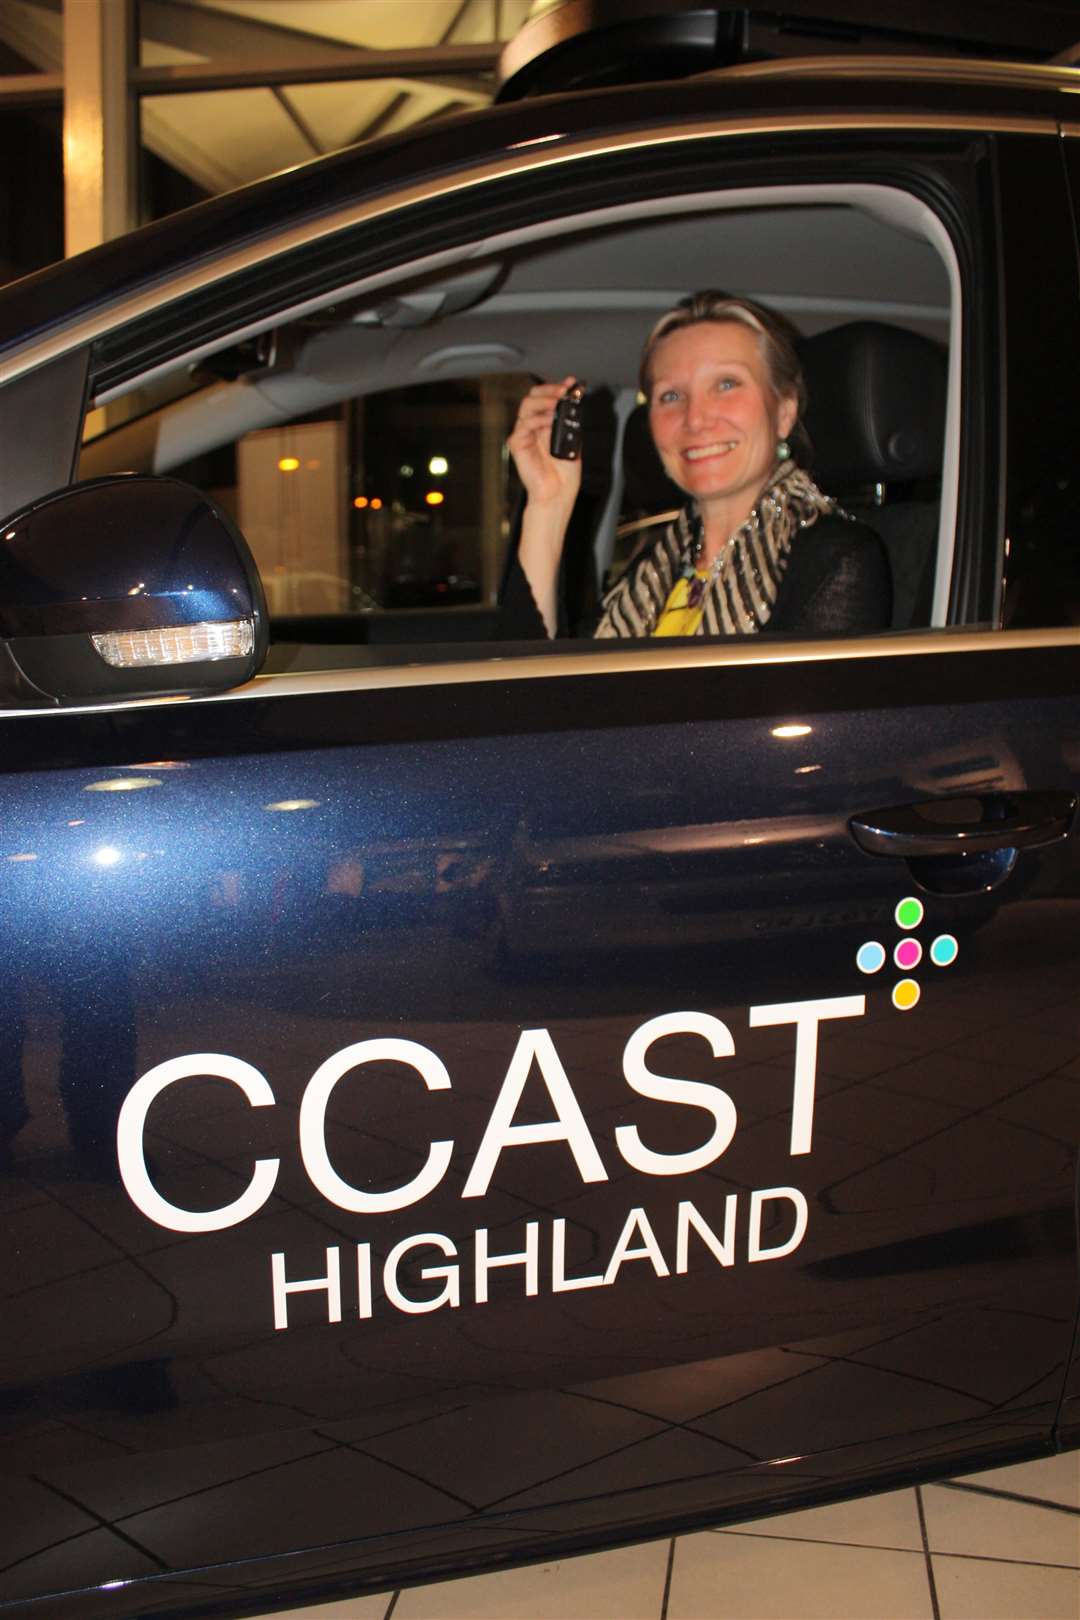 Amanda Nutt of CCAST Highland with the charity's vehicle gifted by the Highland Cross in 2013.